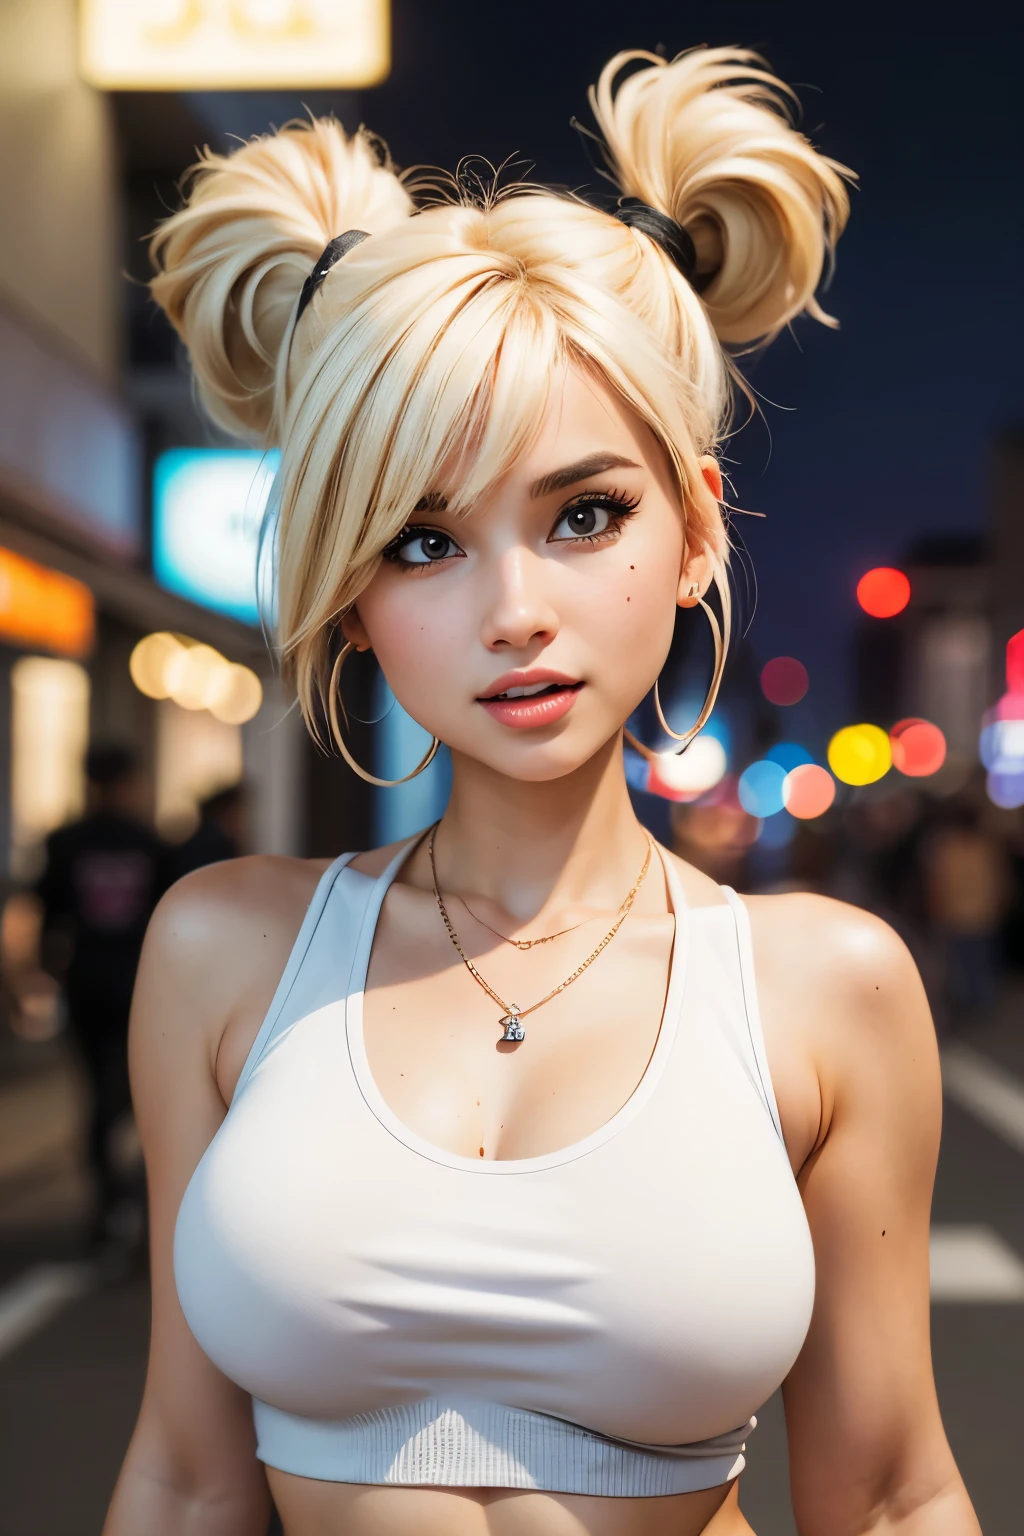 (best quality,4k,highres,ultra-detailed,realistic:1.2), a young girl, very big  breasts,short blond  hair with a pigtail and bangs,  flat abs, fitted white tank top, earrings , necklace out in the street at night, neon lights and advertising, close-up portrait 